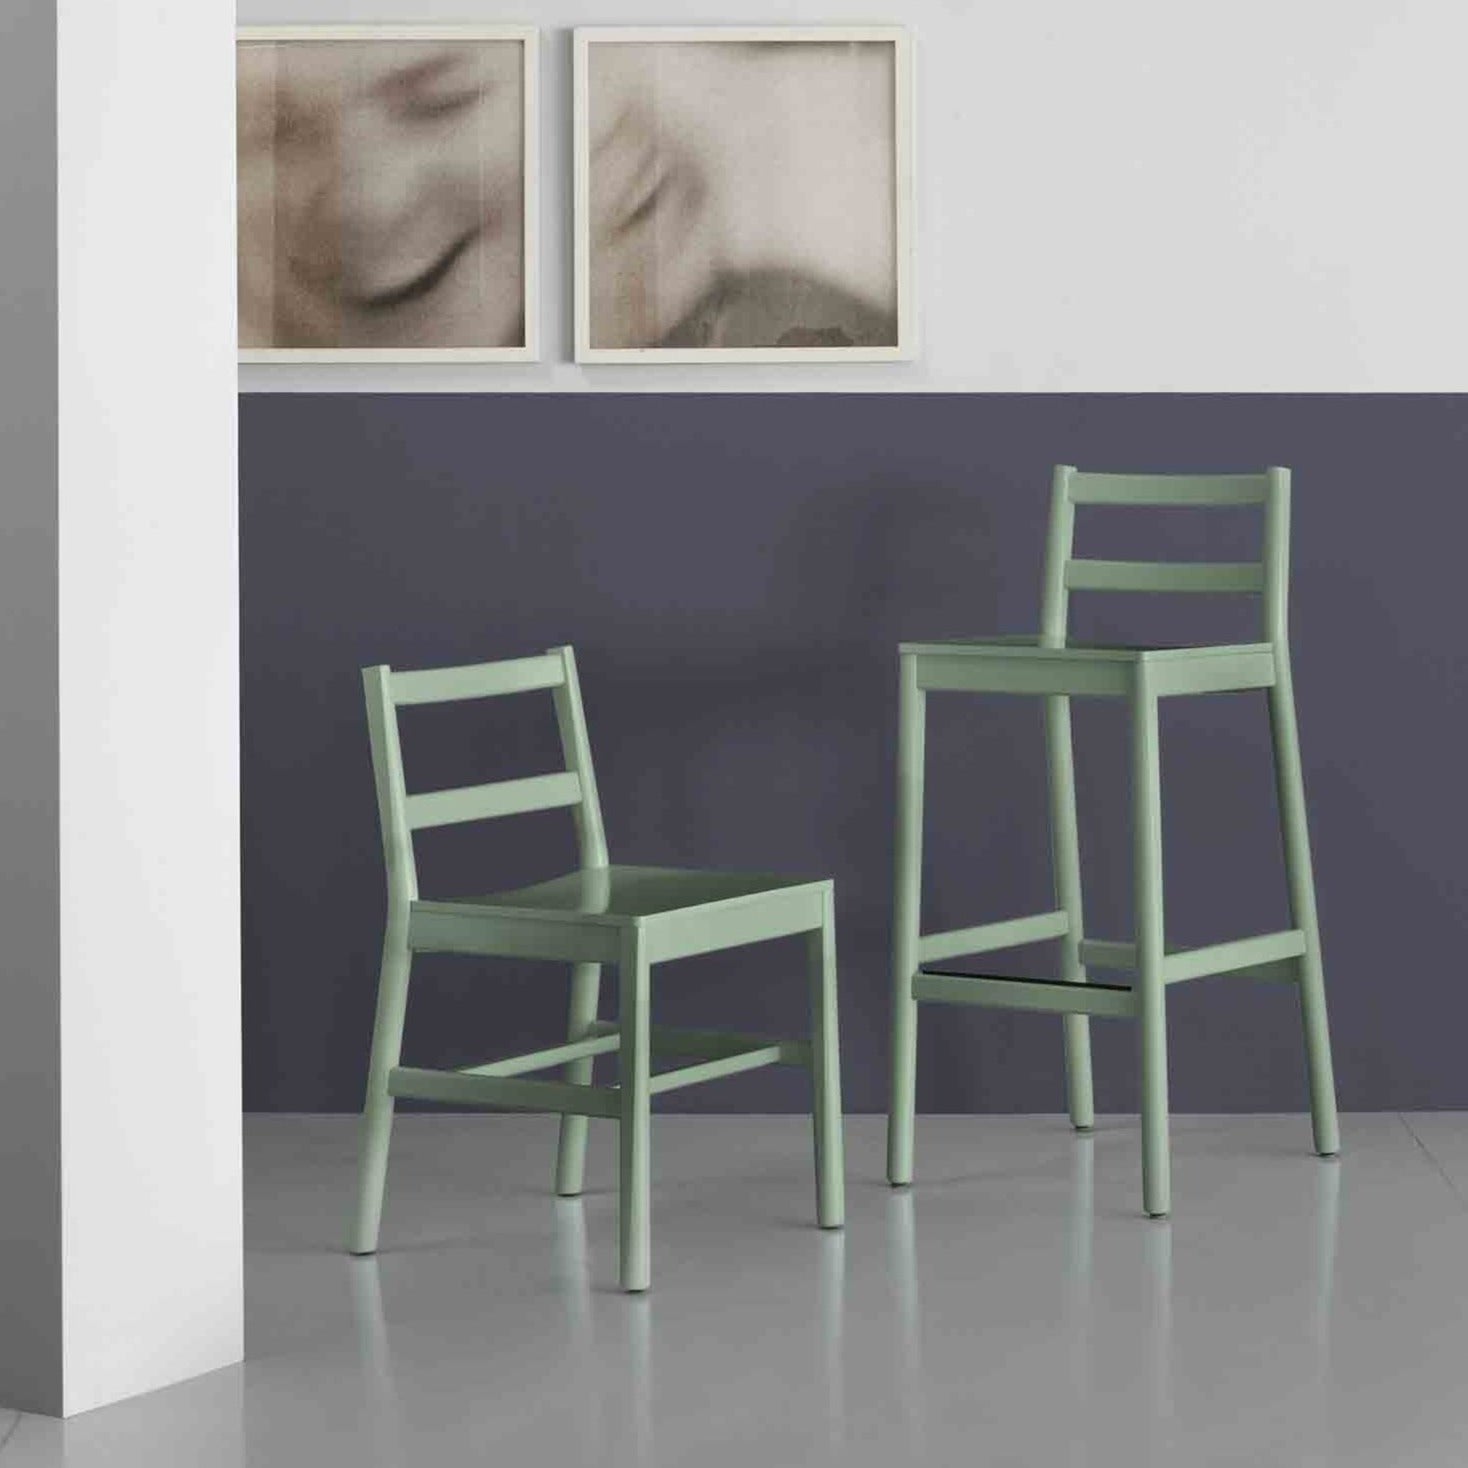 JULIE LE Stool green frame, interior view